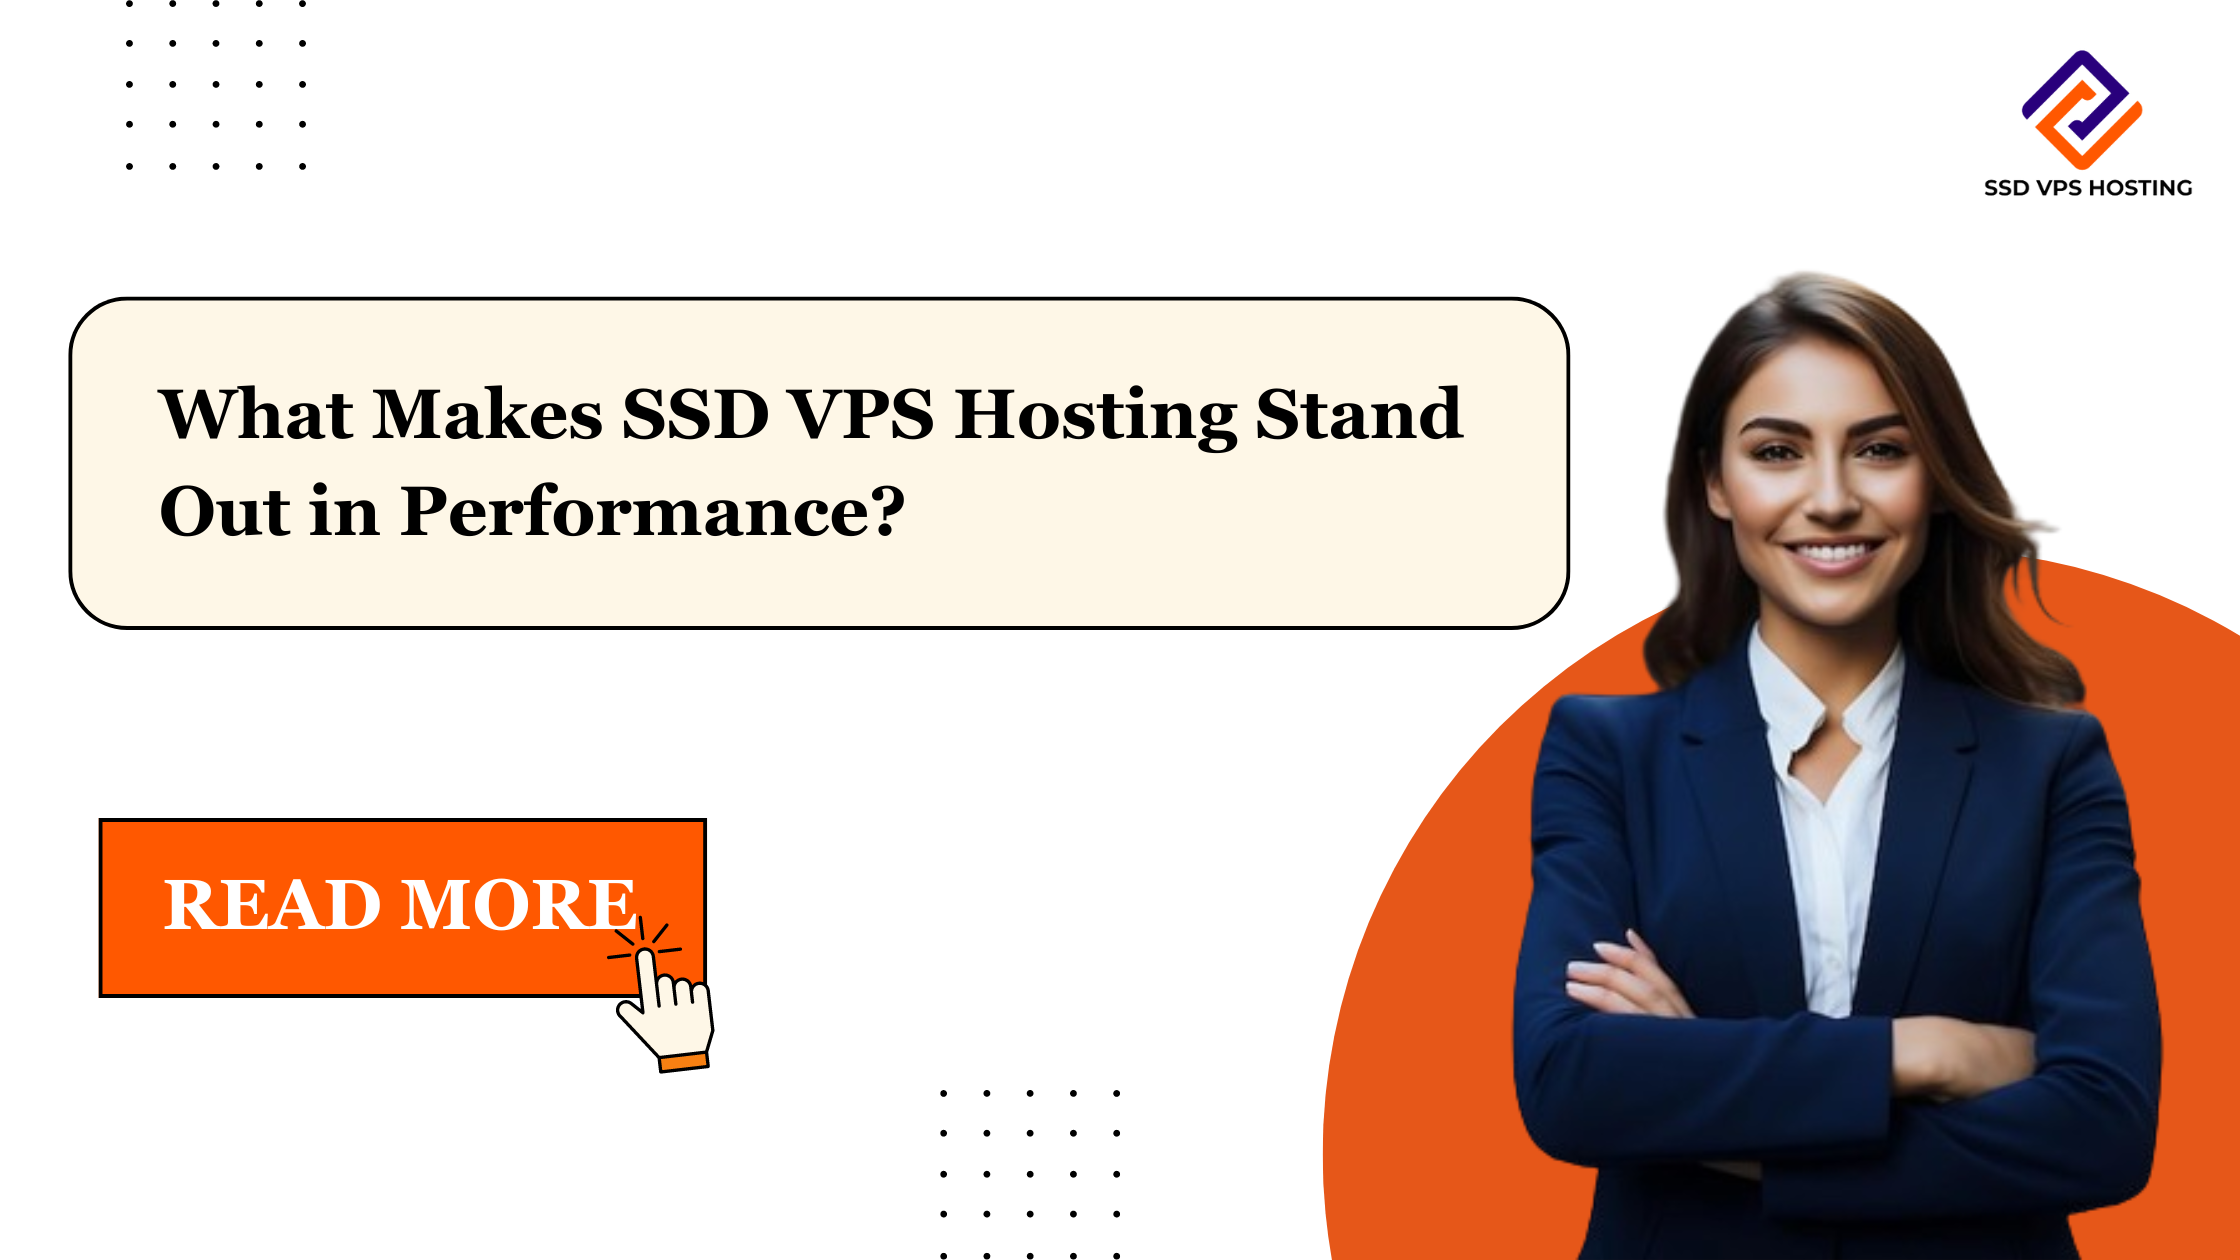 What Makes SSD VPS Hosting Stand Out in Performance?